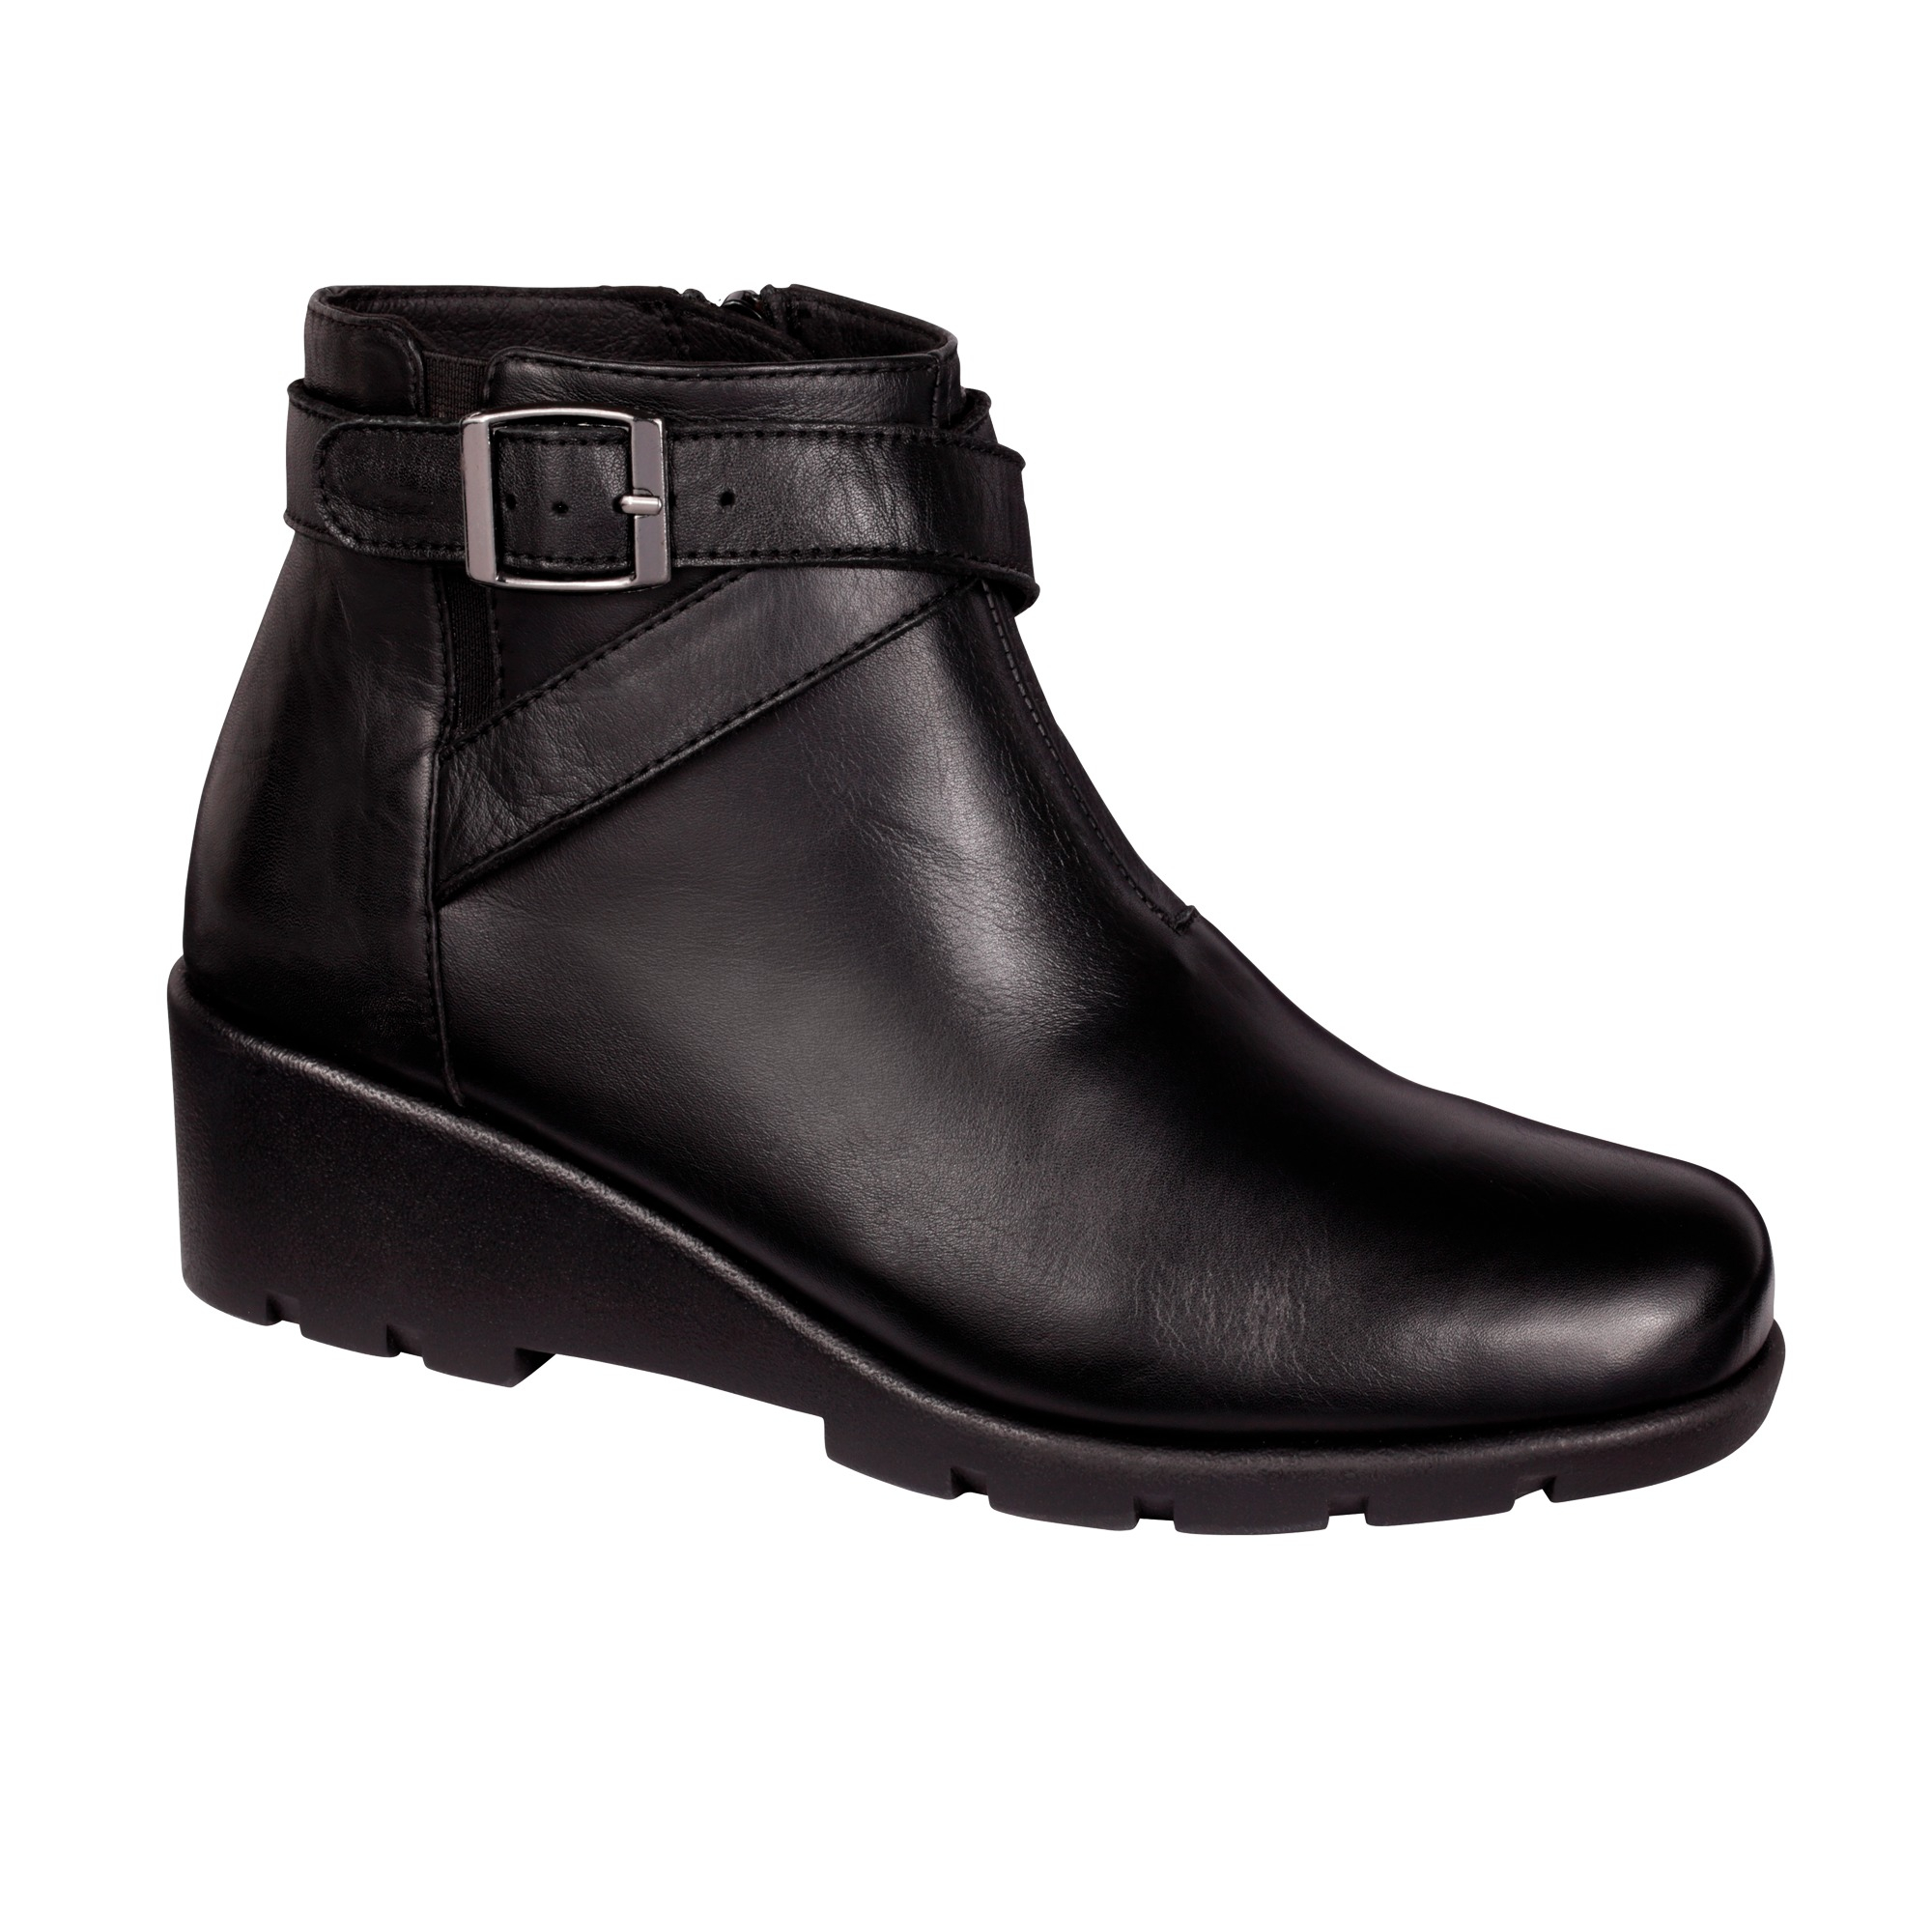 SCHOLL WOMEN'S ANKLE BOOTS PEYTON HIGH QUALITY LEATHER BLACK | SanitariaWeb